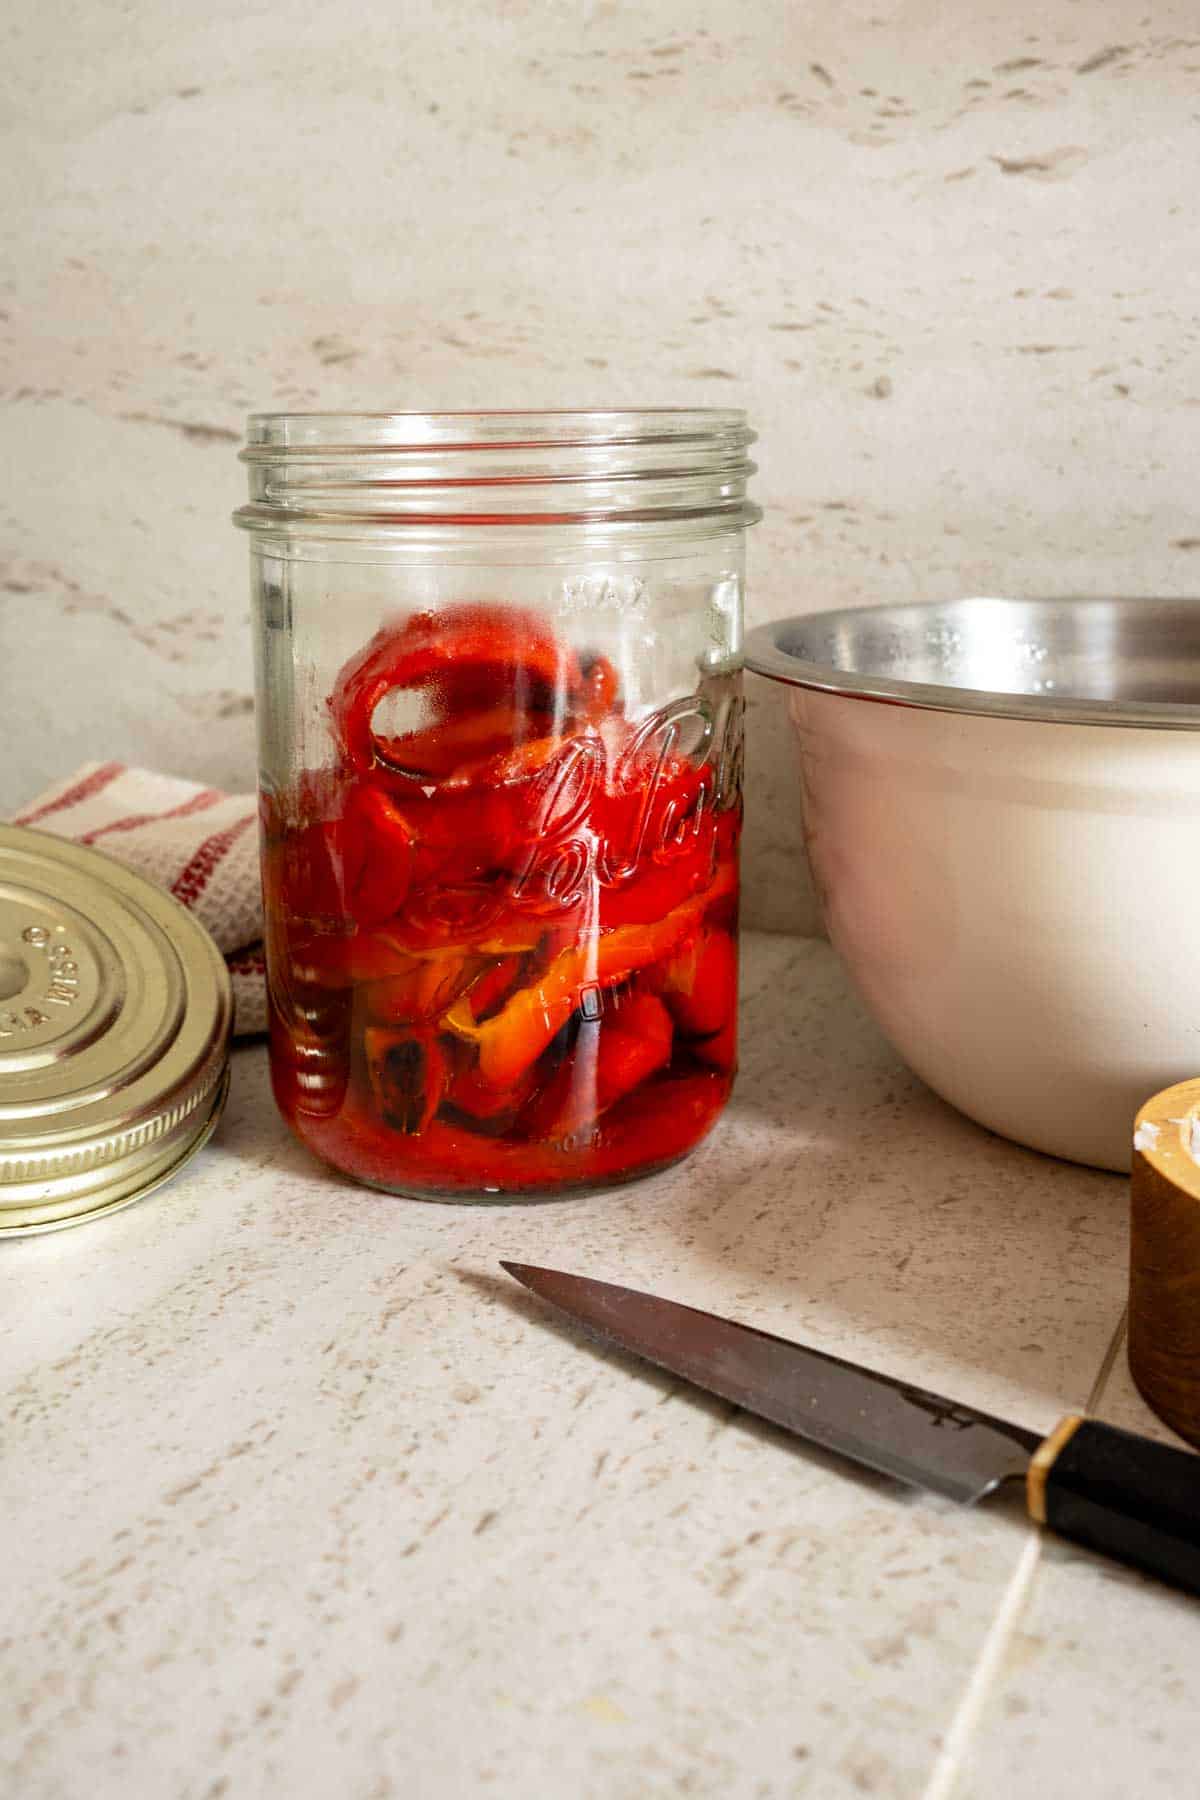 A jar filled with sliced roasted red peppers on a kitchen countertop, with a knife and an empty bowl nearby.